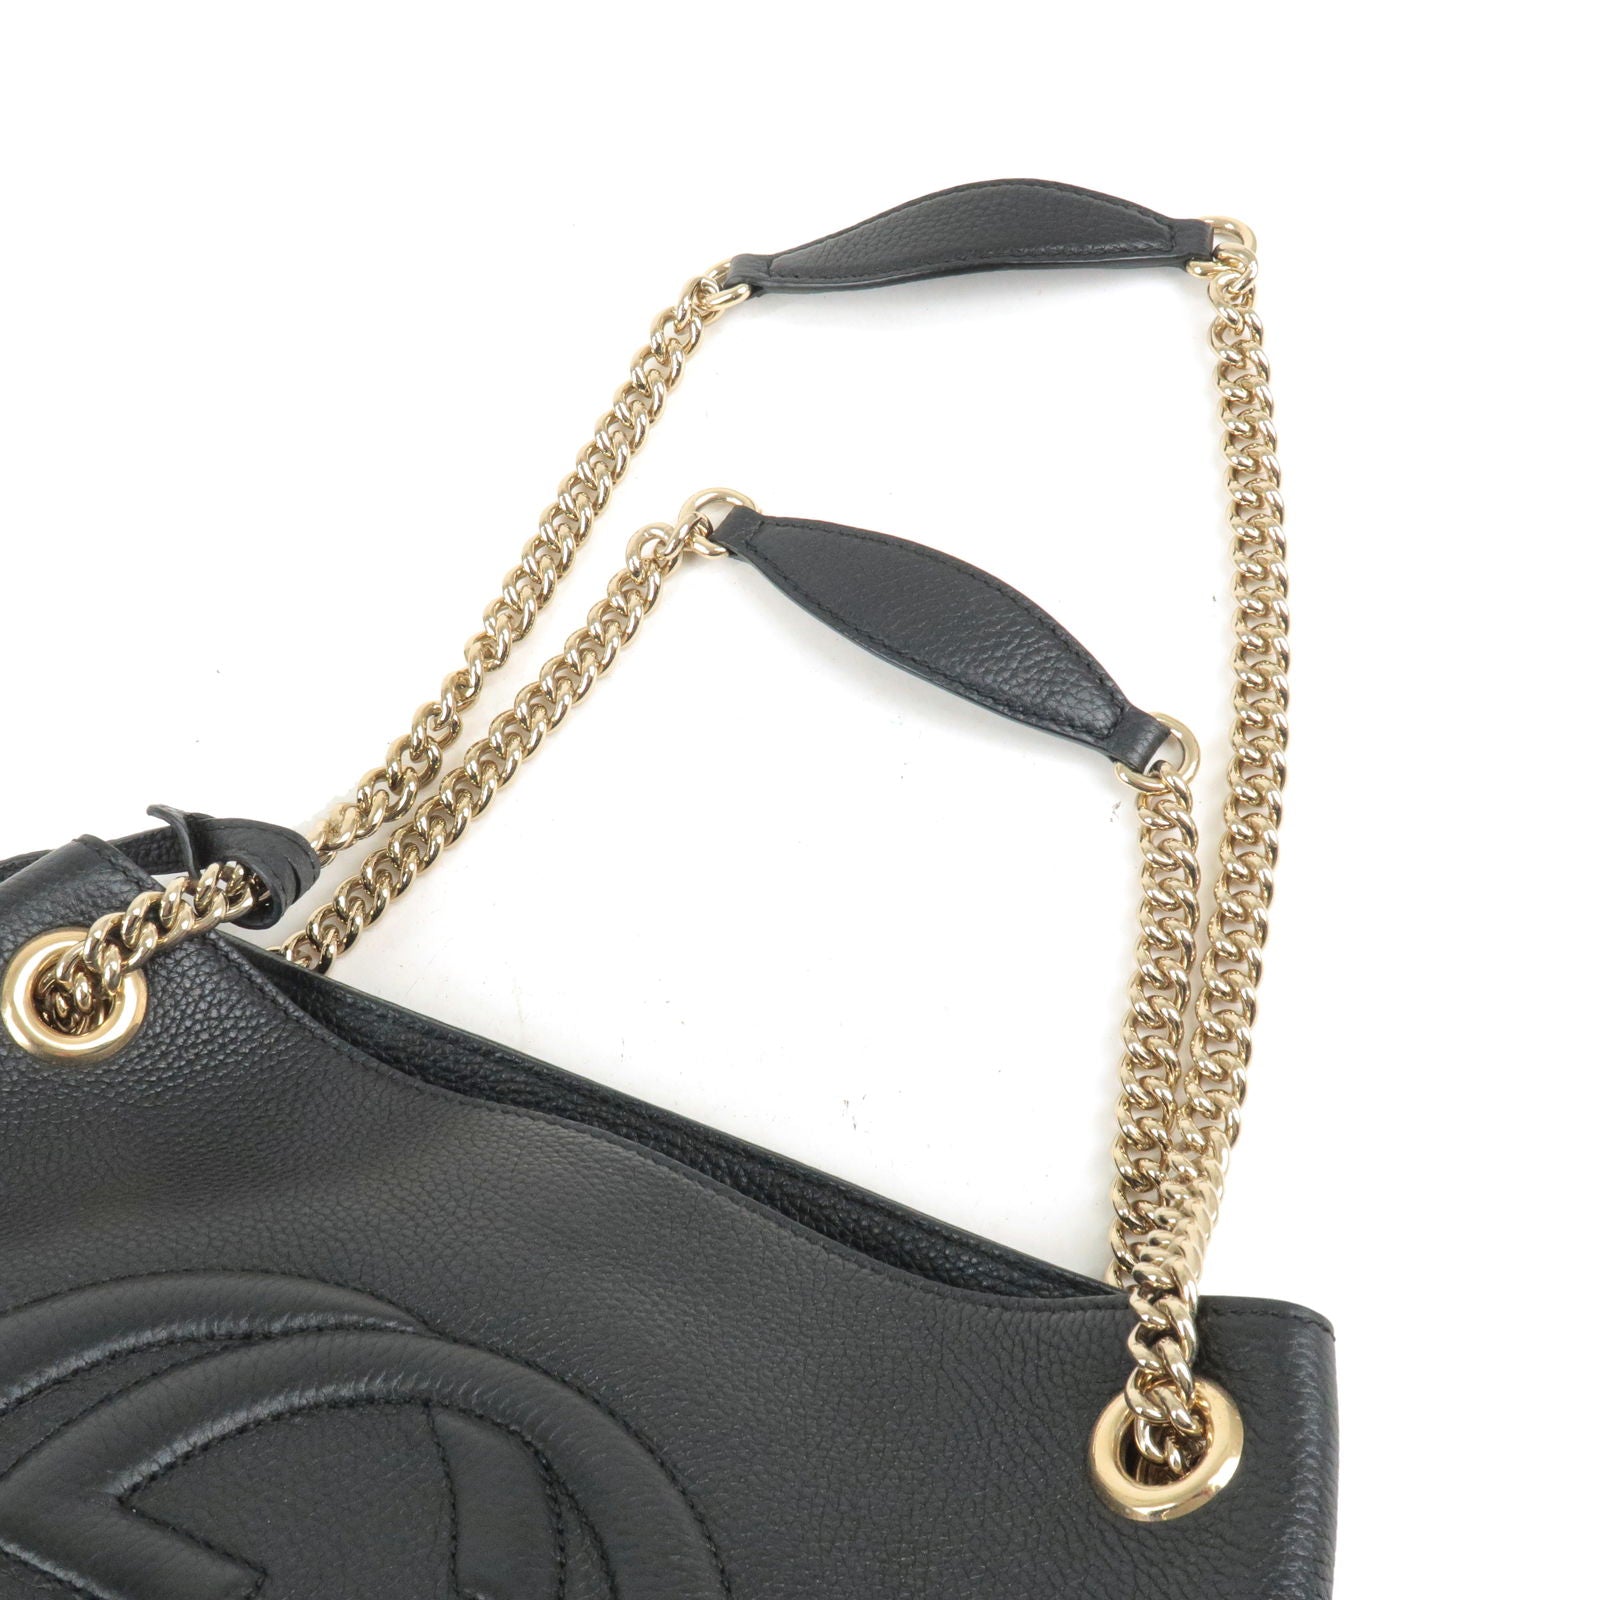 Gucci Soho Tote Bag in Gold Pebbled Leather Chain